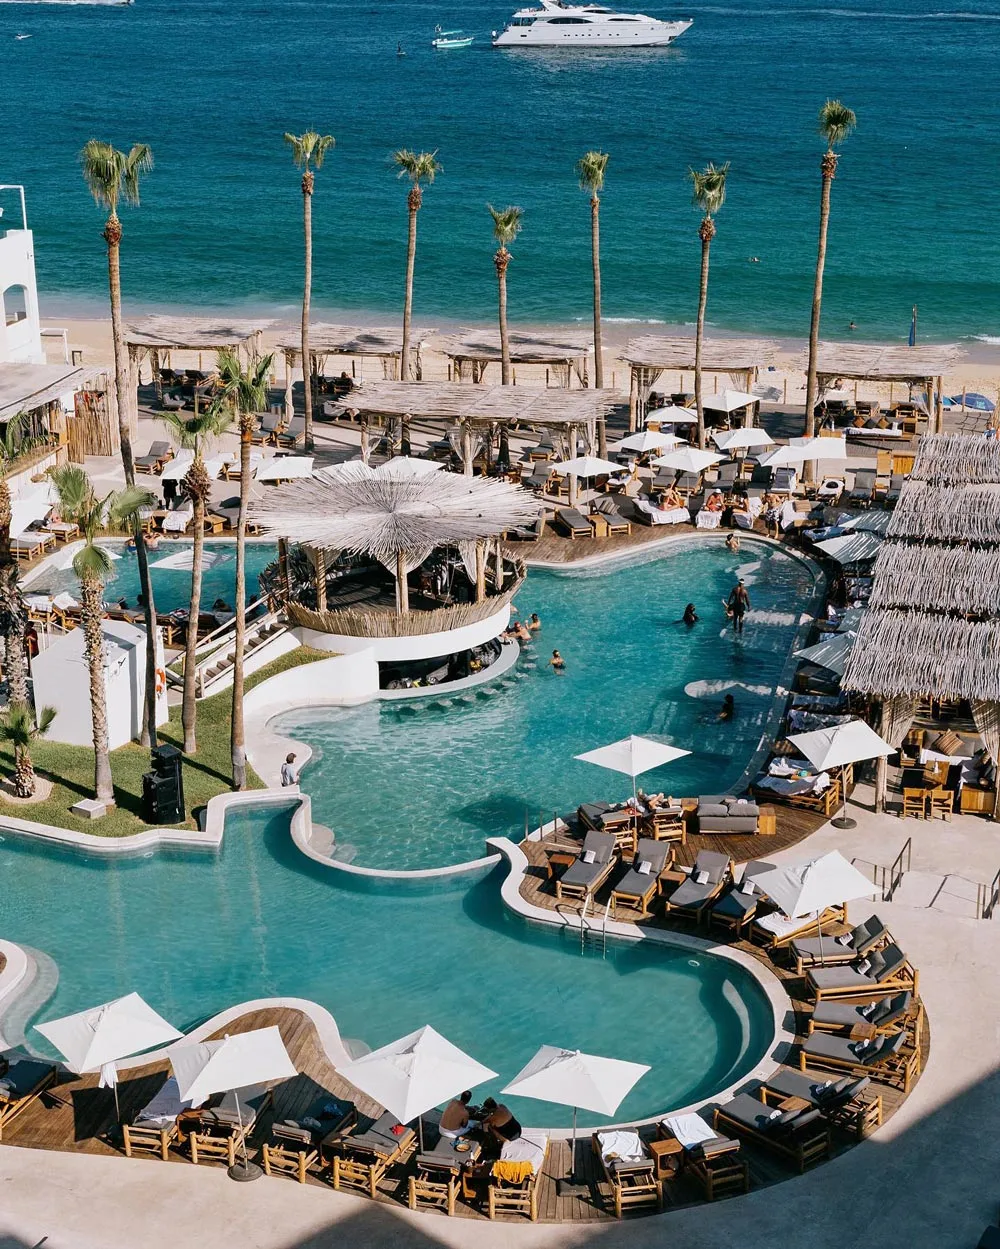 The ME Cabo by Melia is one of the trendiest hotels in Cabo on a swimmable beach.